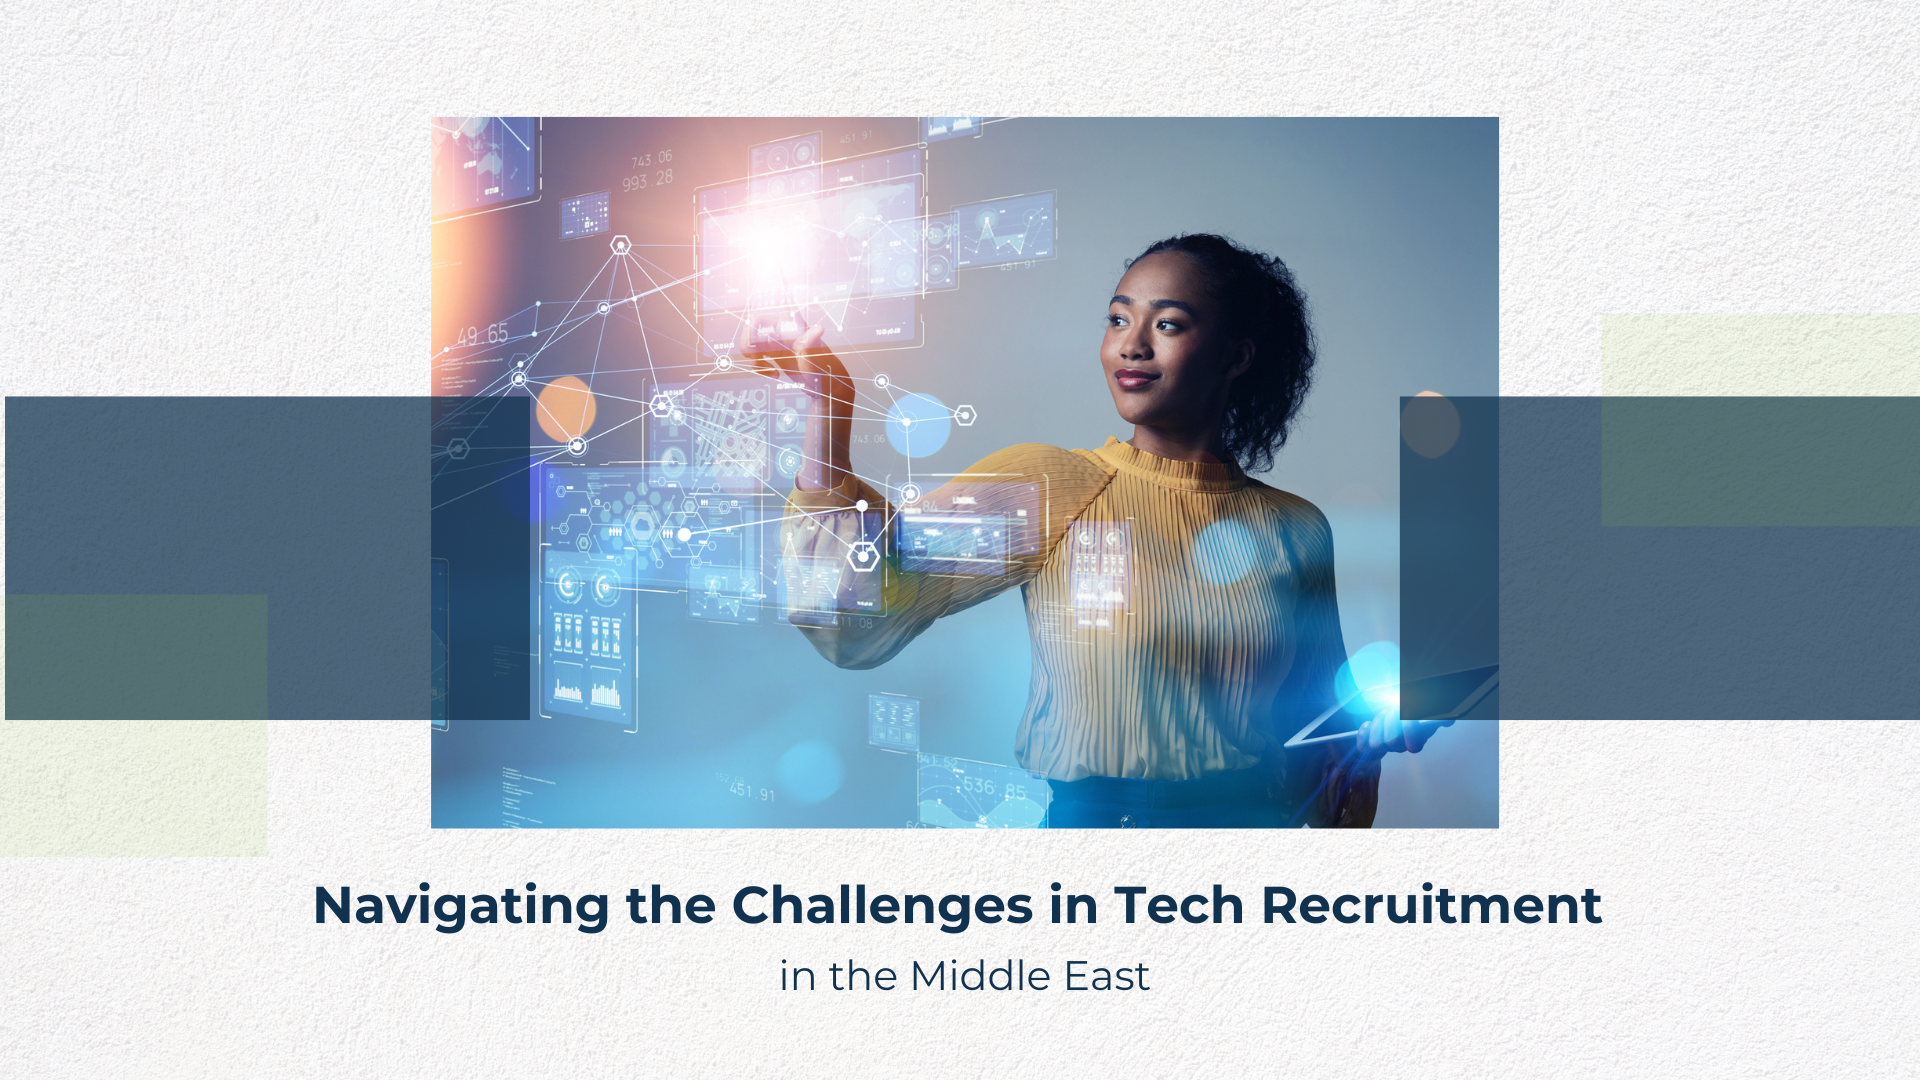 Challenges in tech recruitment